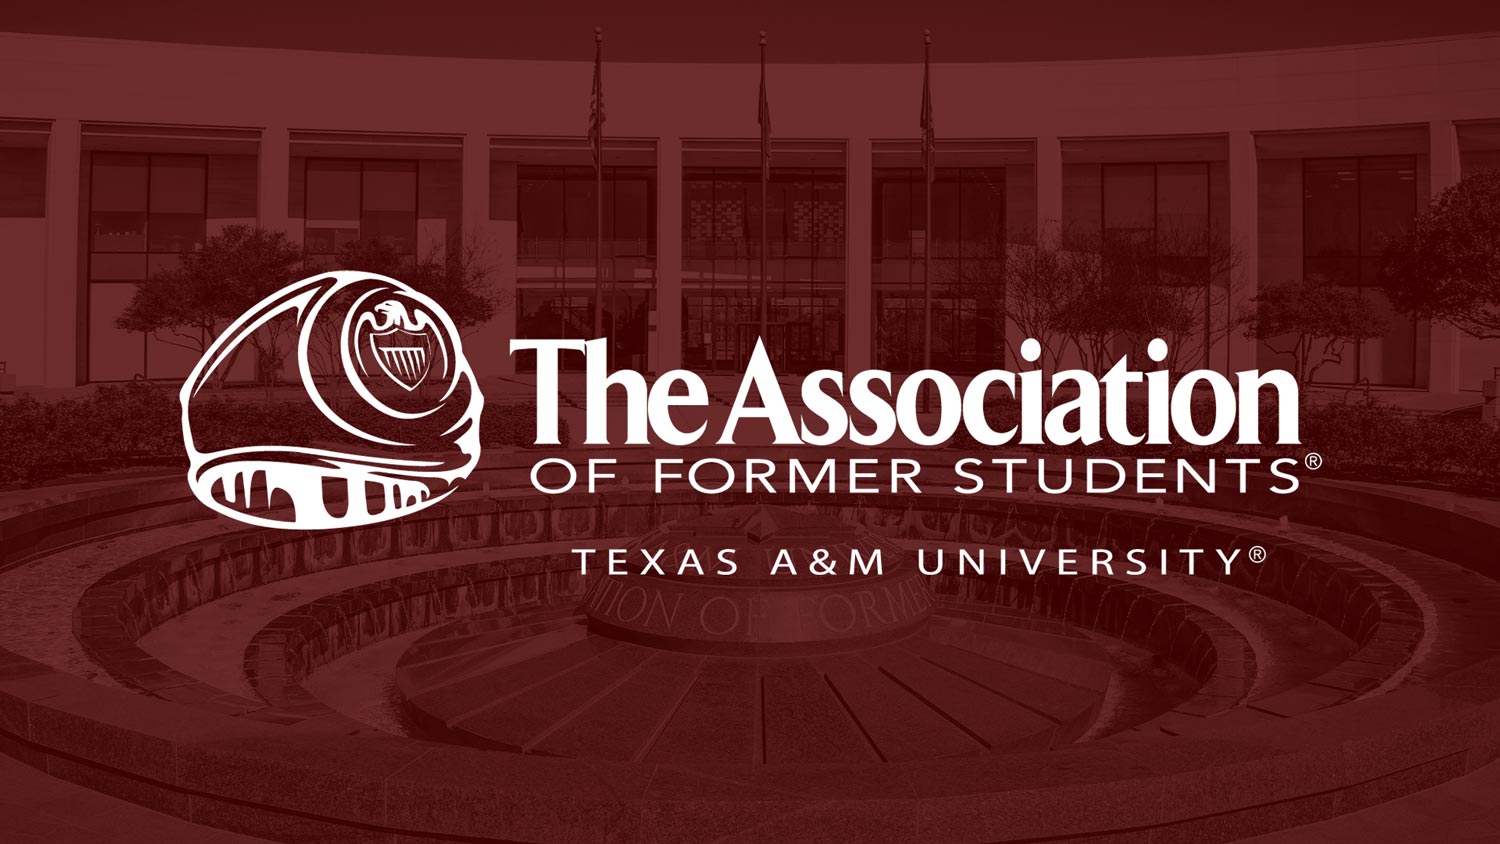 The Association of Former Students logo